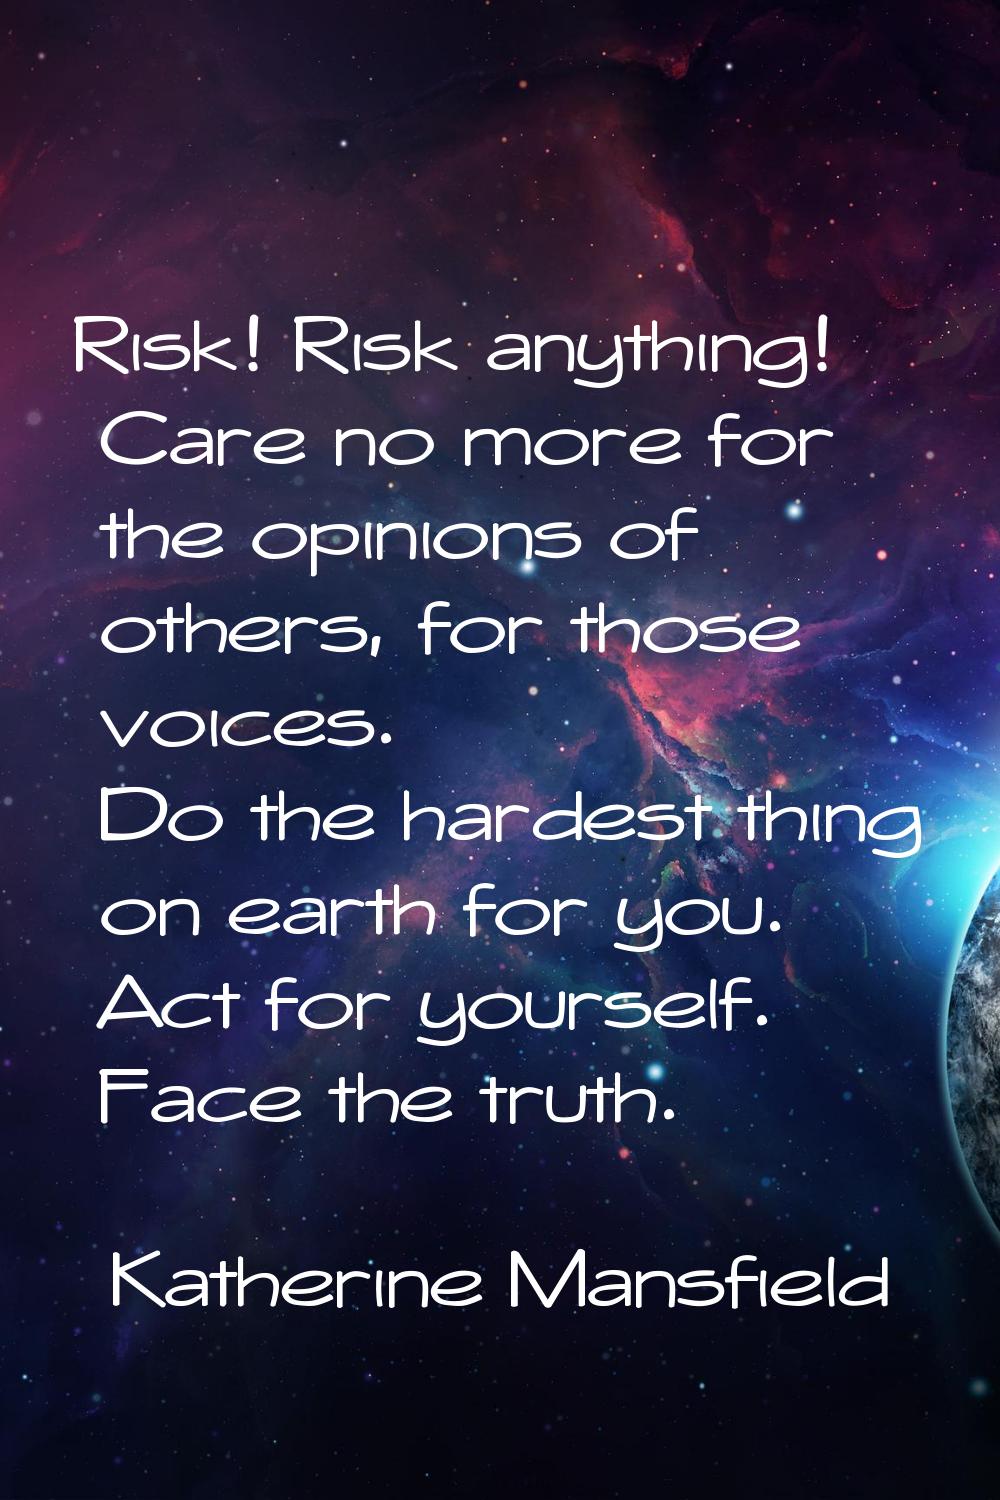 Risk! Risk anything! Care no more for the opinions of others, for those voices. Do the hardest thin